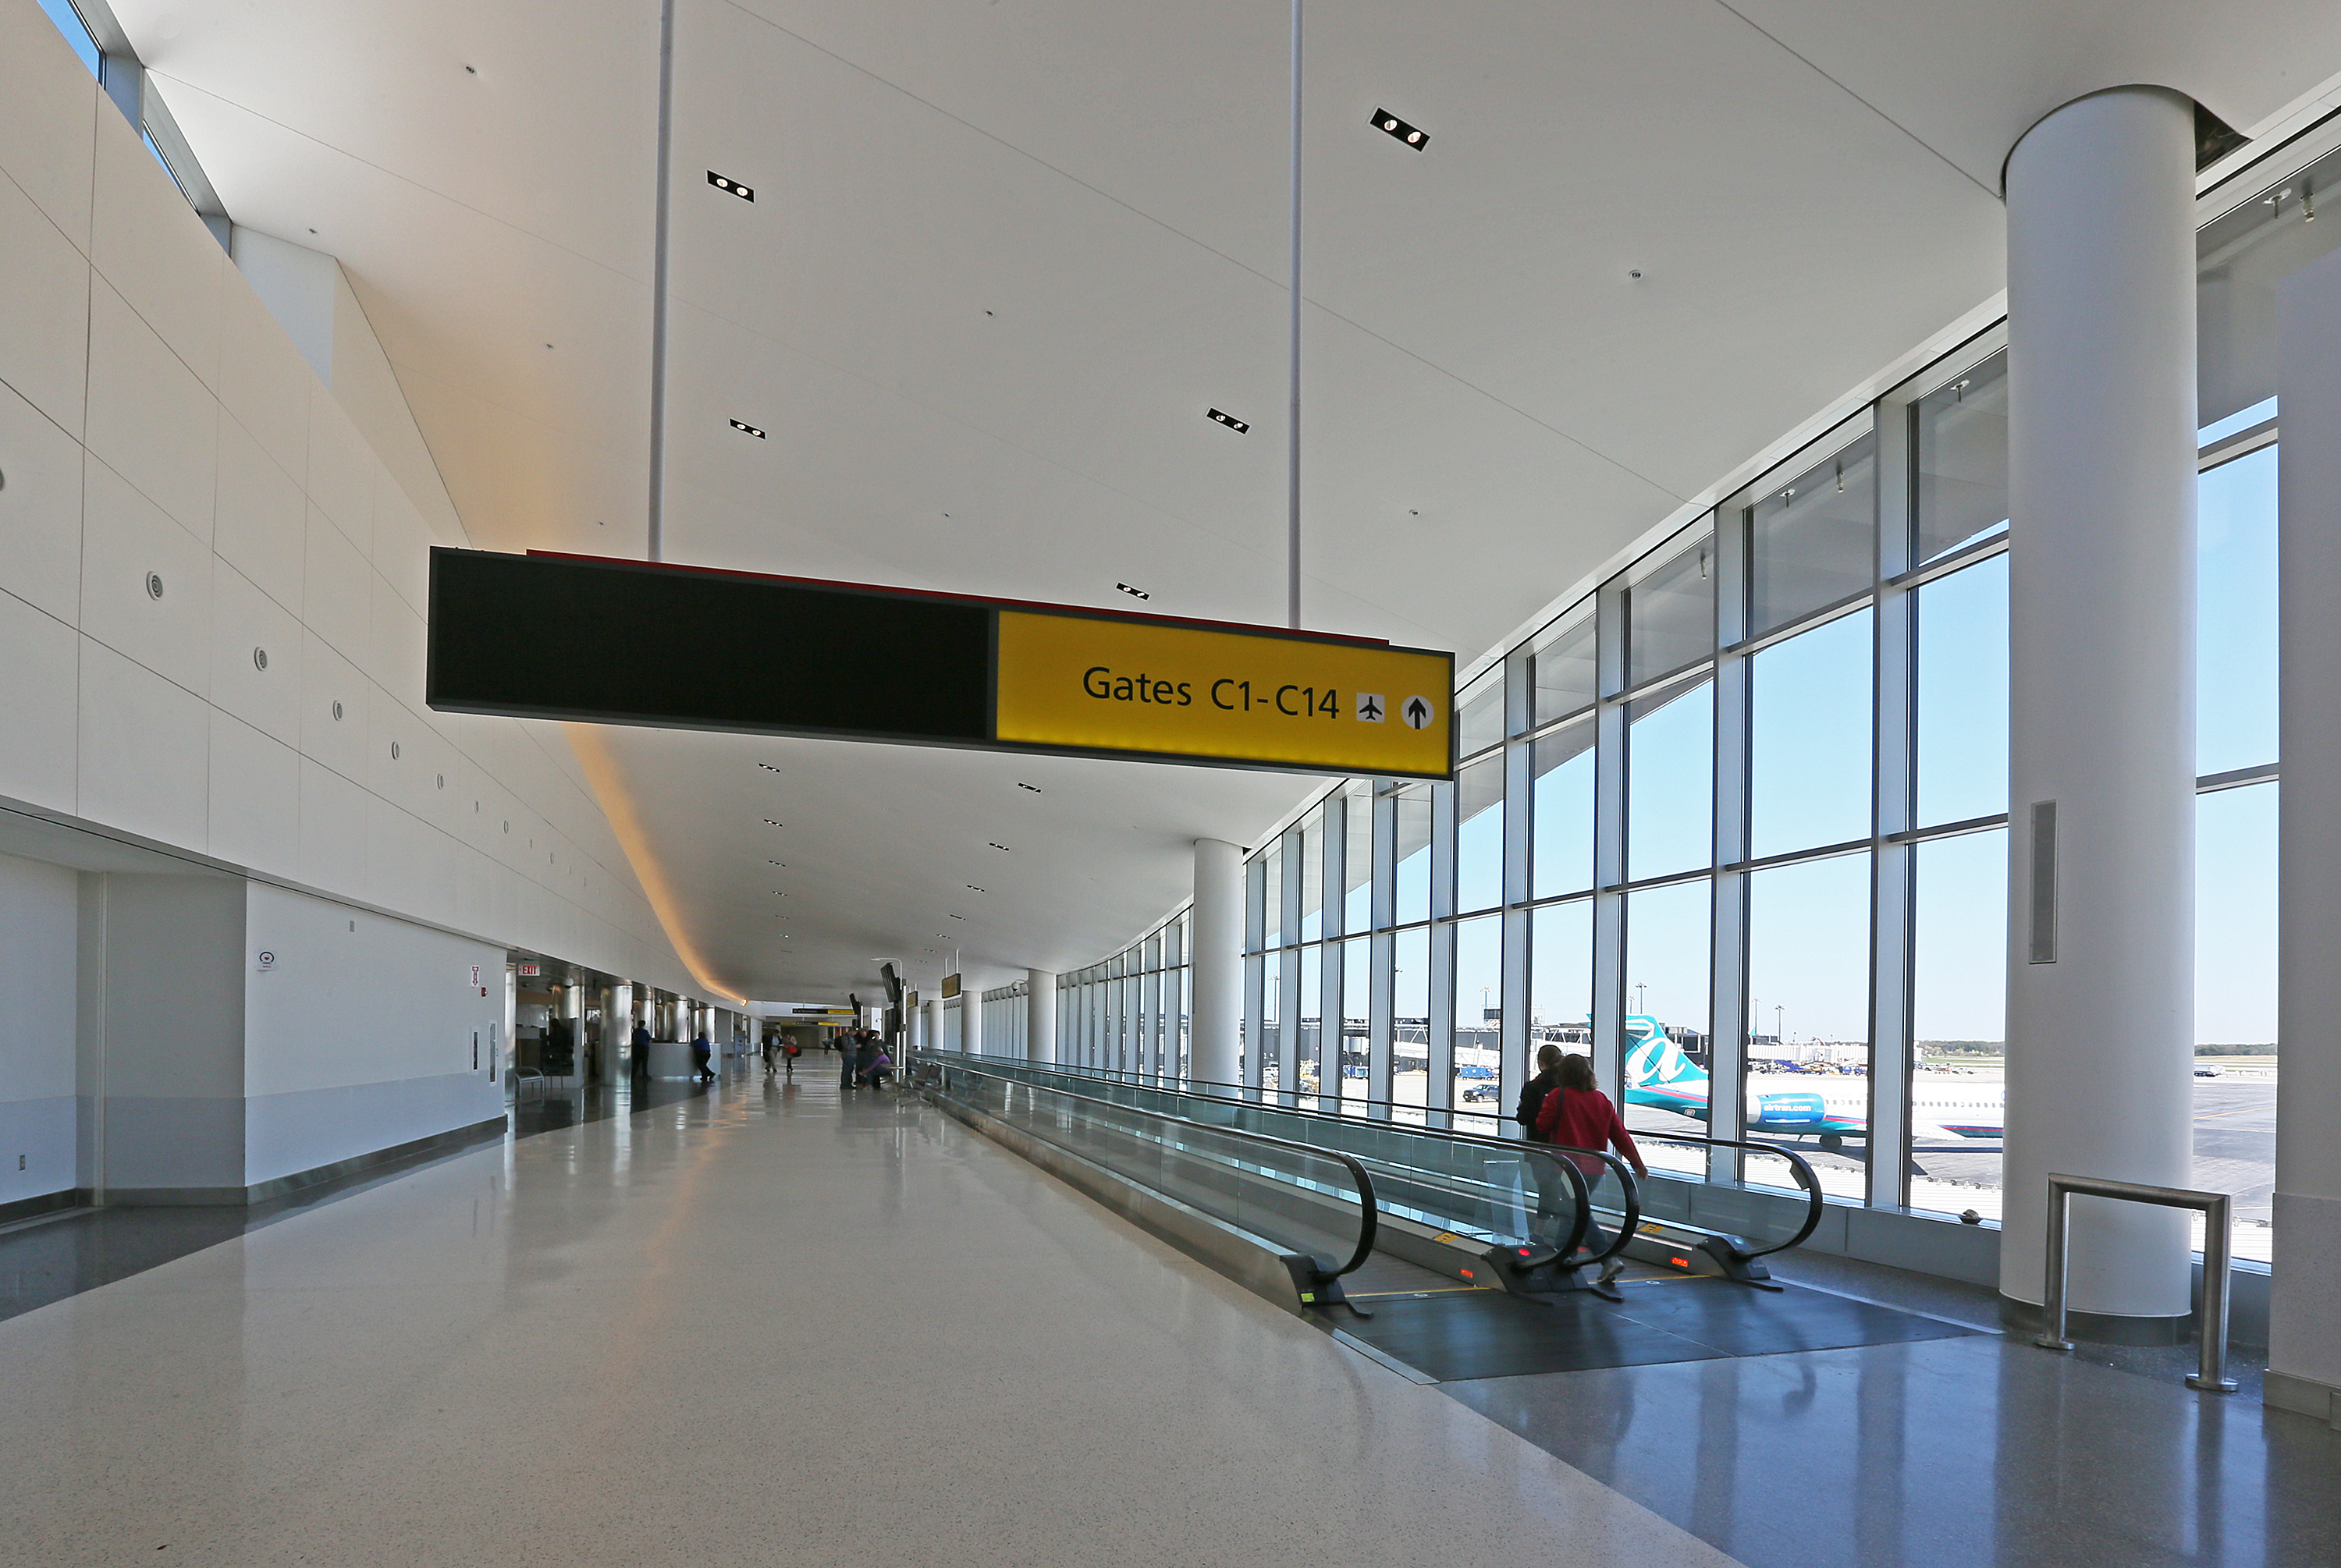 BWI Thurgood Marshall Airport Terminal BC and Concourse C – JMT